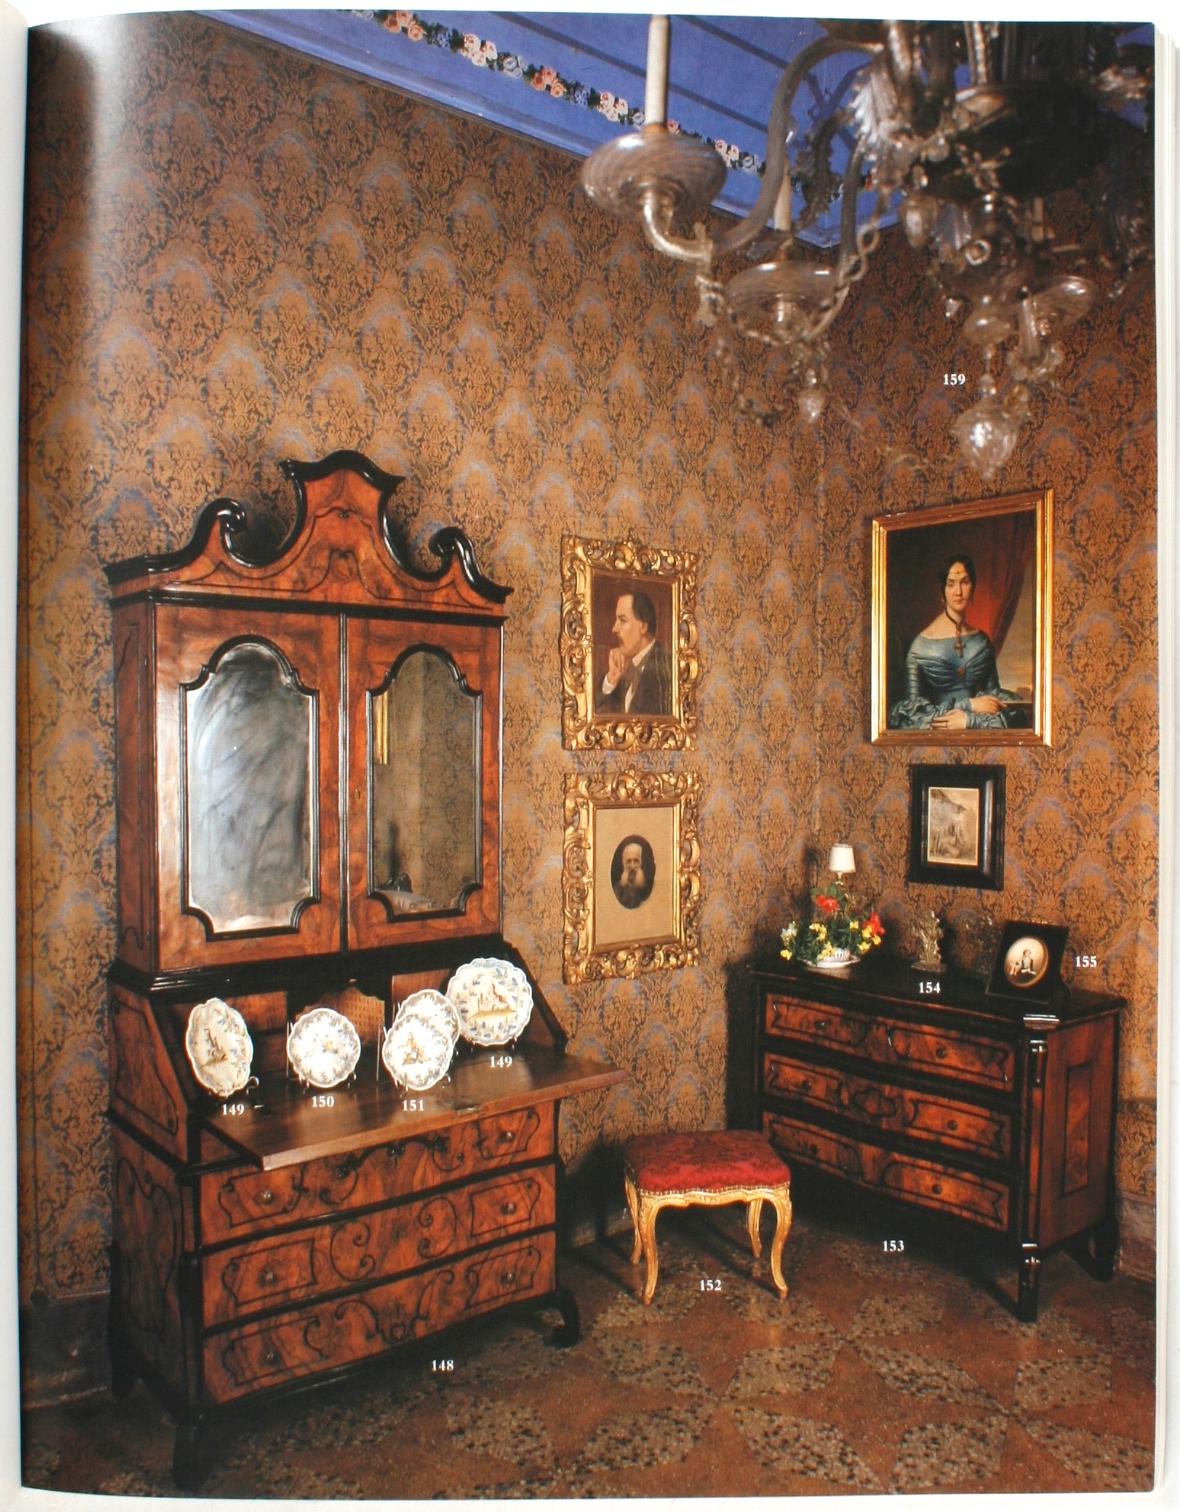 Christie's: Palazzo Dal Pozzo Arredi e Dipinti Dalla, September 1998. Softcover auction catalogue 857 lots on 107 pages, all in color. Italian furniture, painting and accessories.
NPT Books a division of N.P. Trent Antiques has a large collection of